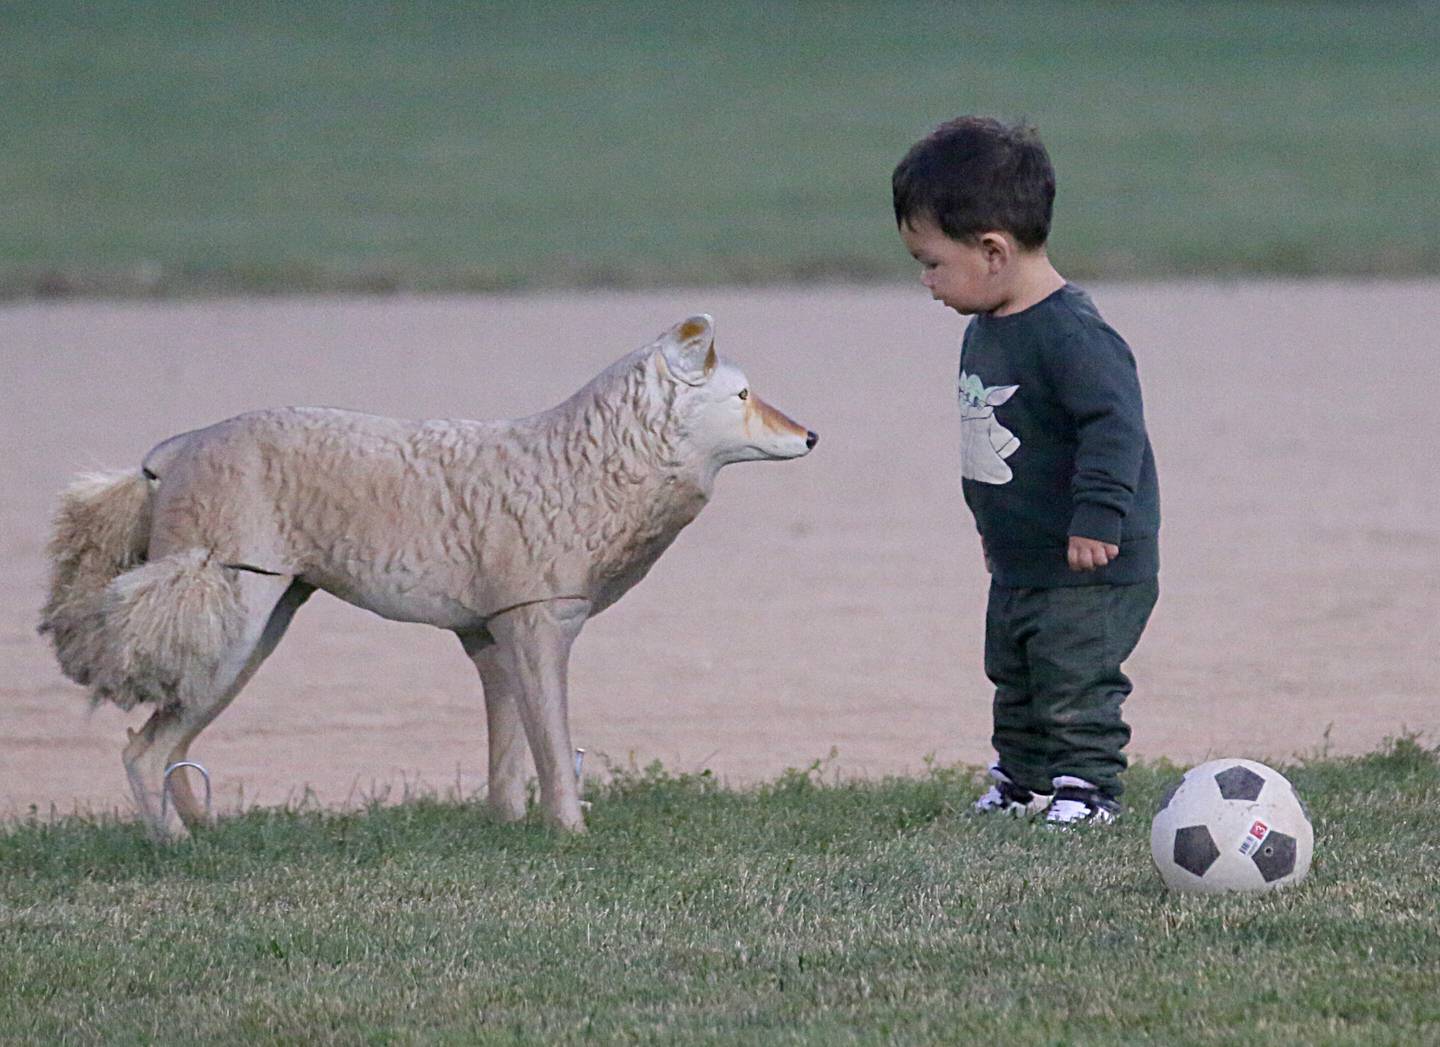 Diego Nanez 1, of Peru, stares at a fake coyote on the baseball diamond during the soccer game between L-P and Ottawa on Monday, Oct. 3, 2022 at Ottawa High School. The decoy was placed by the school to scare critters from coming onto the field.